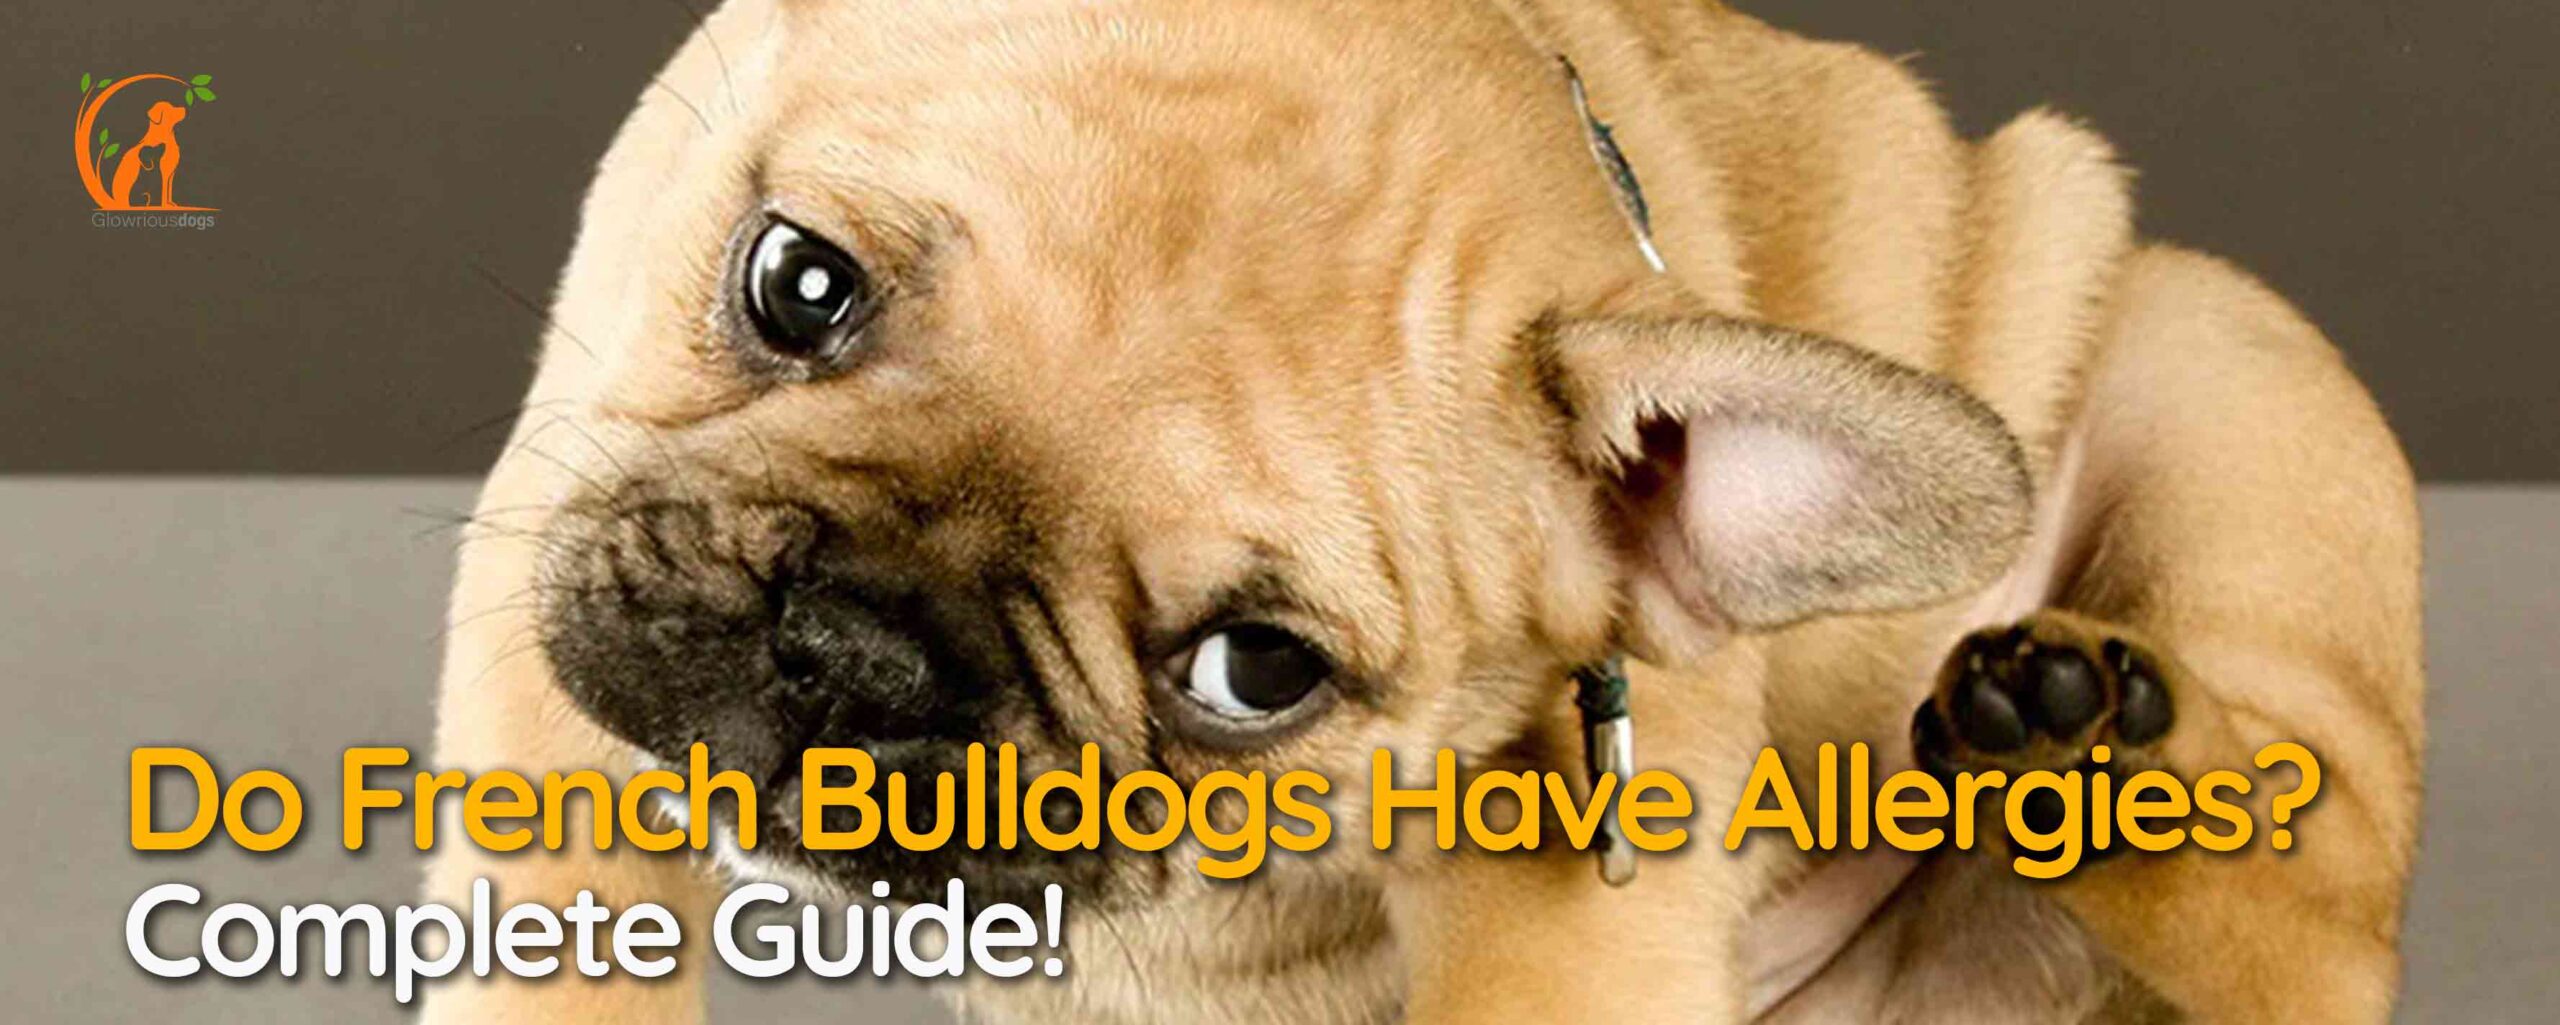 Do French Bulldogs Have Allergies? Complete Guide!